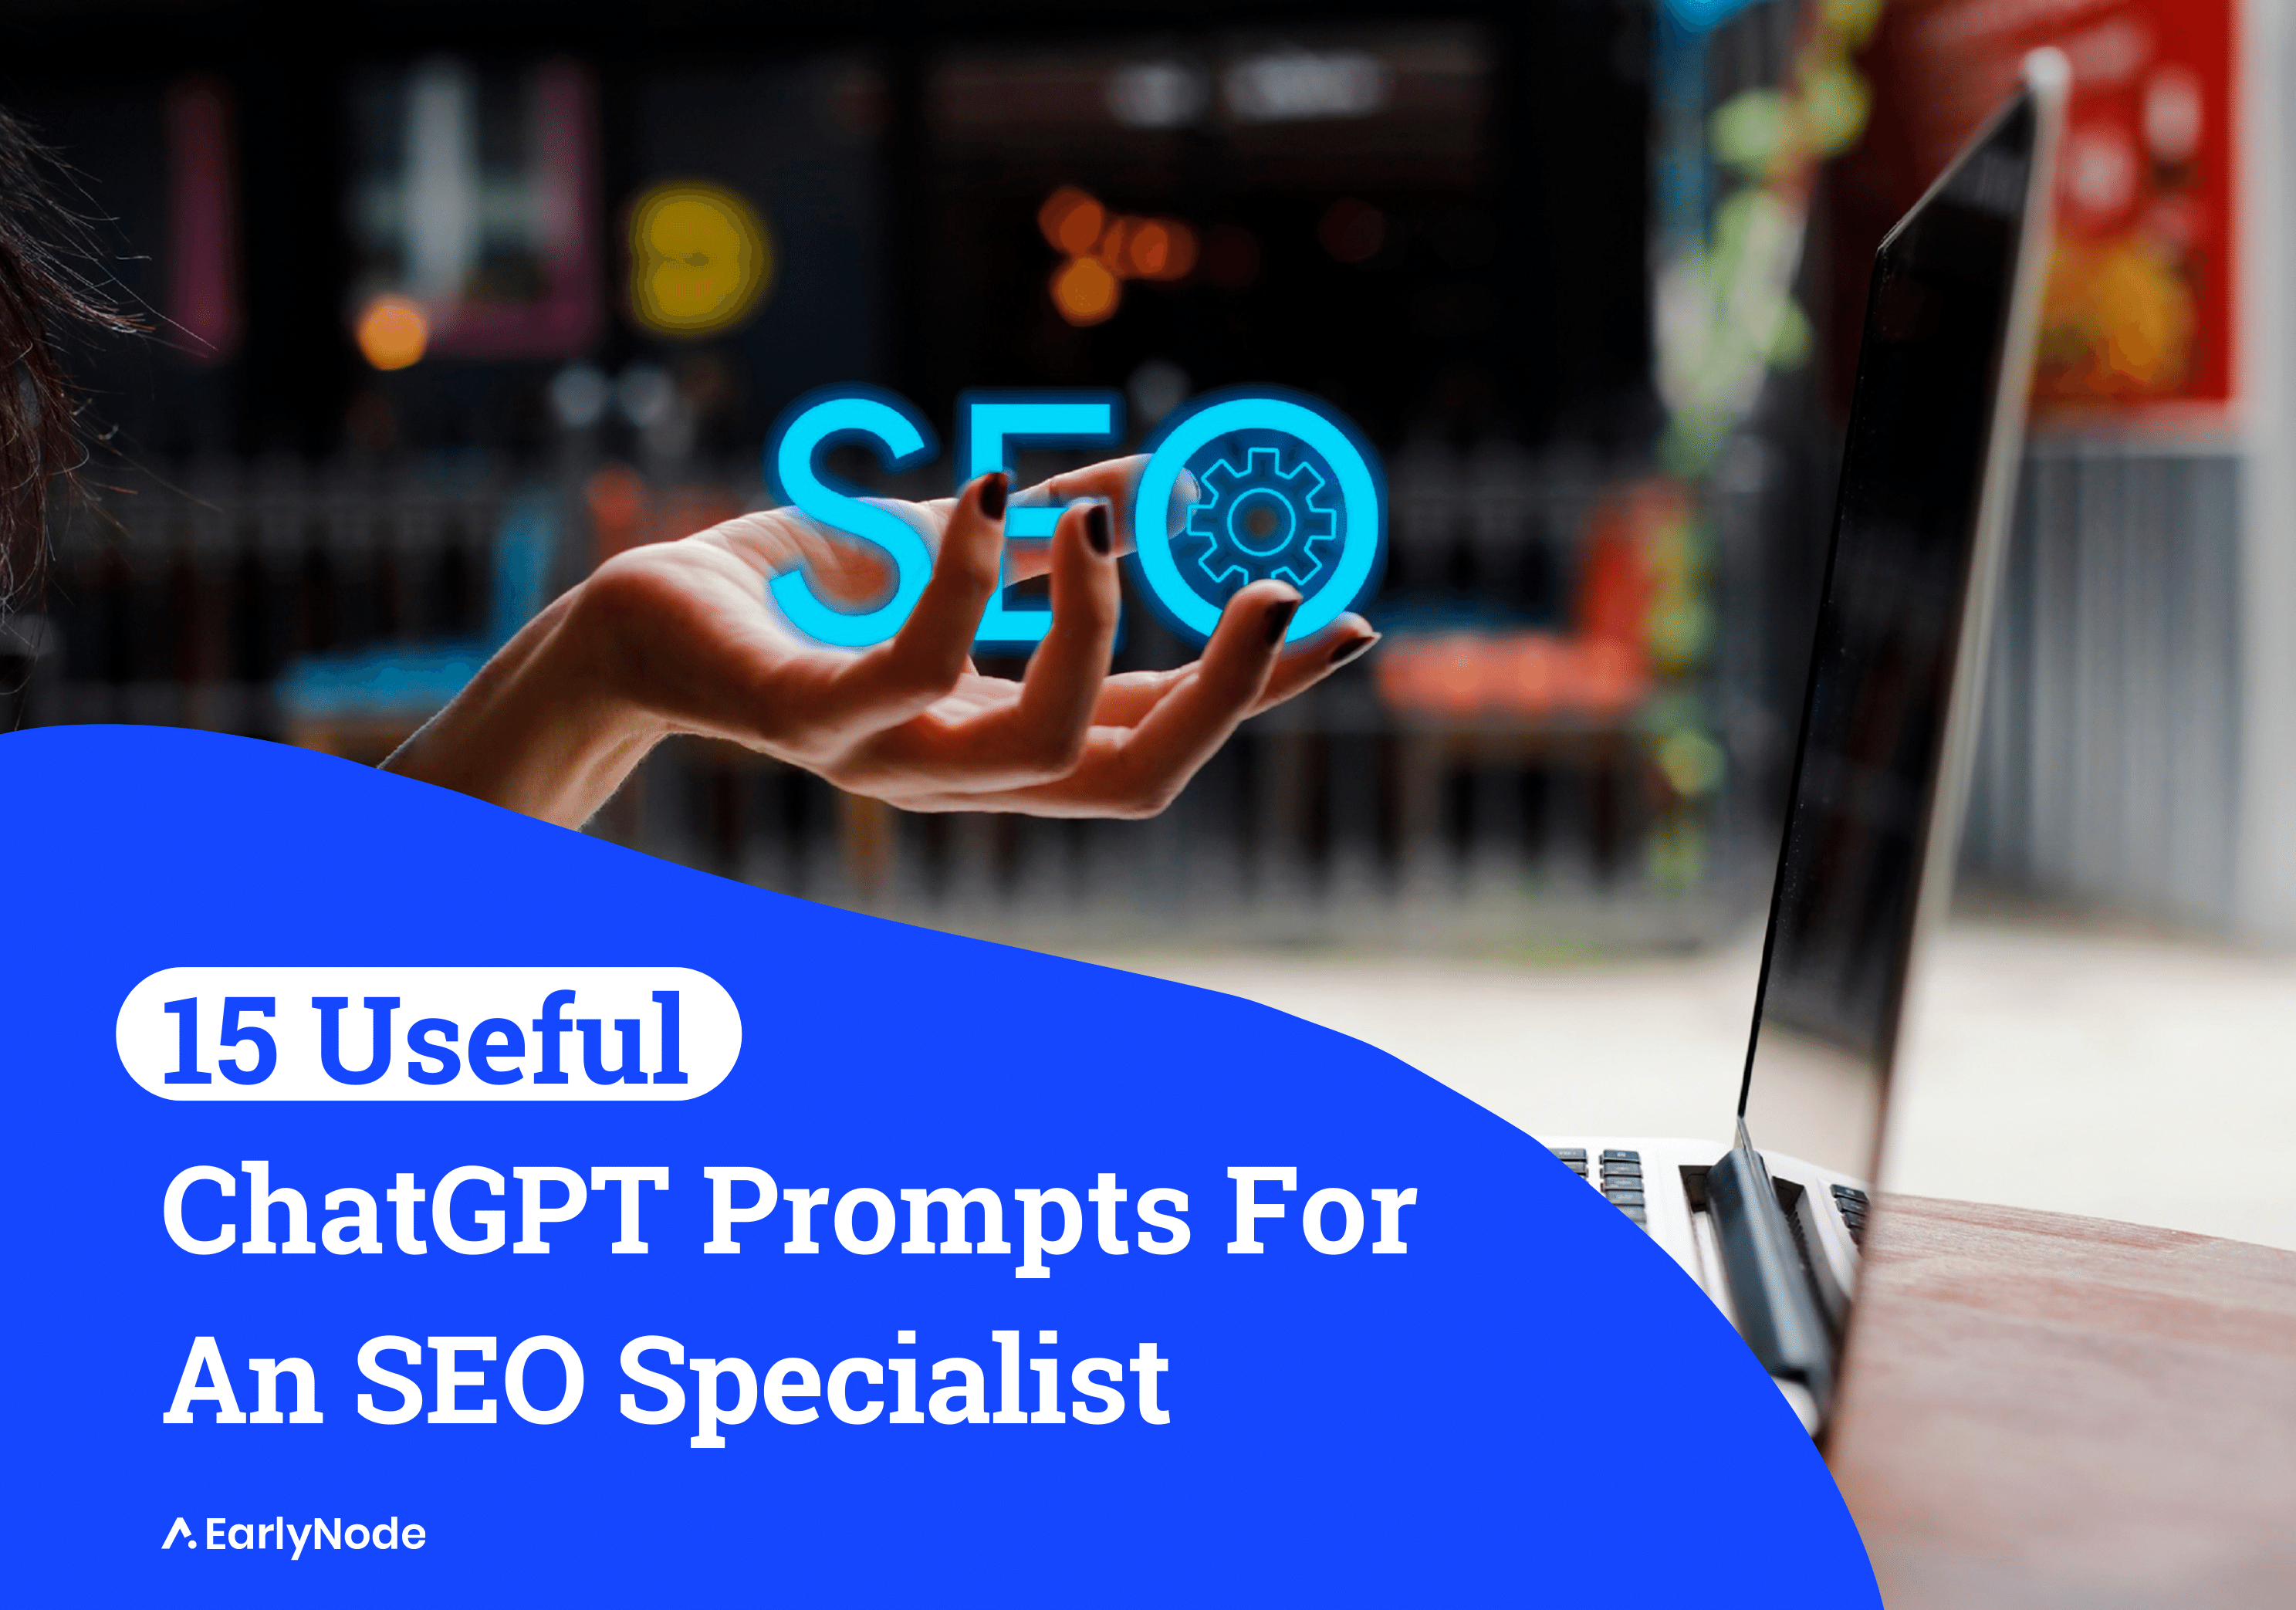 15 Tailored ChatGPT Prompts For SEO Specialists